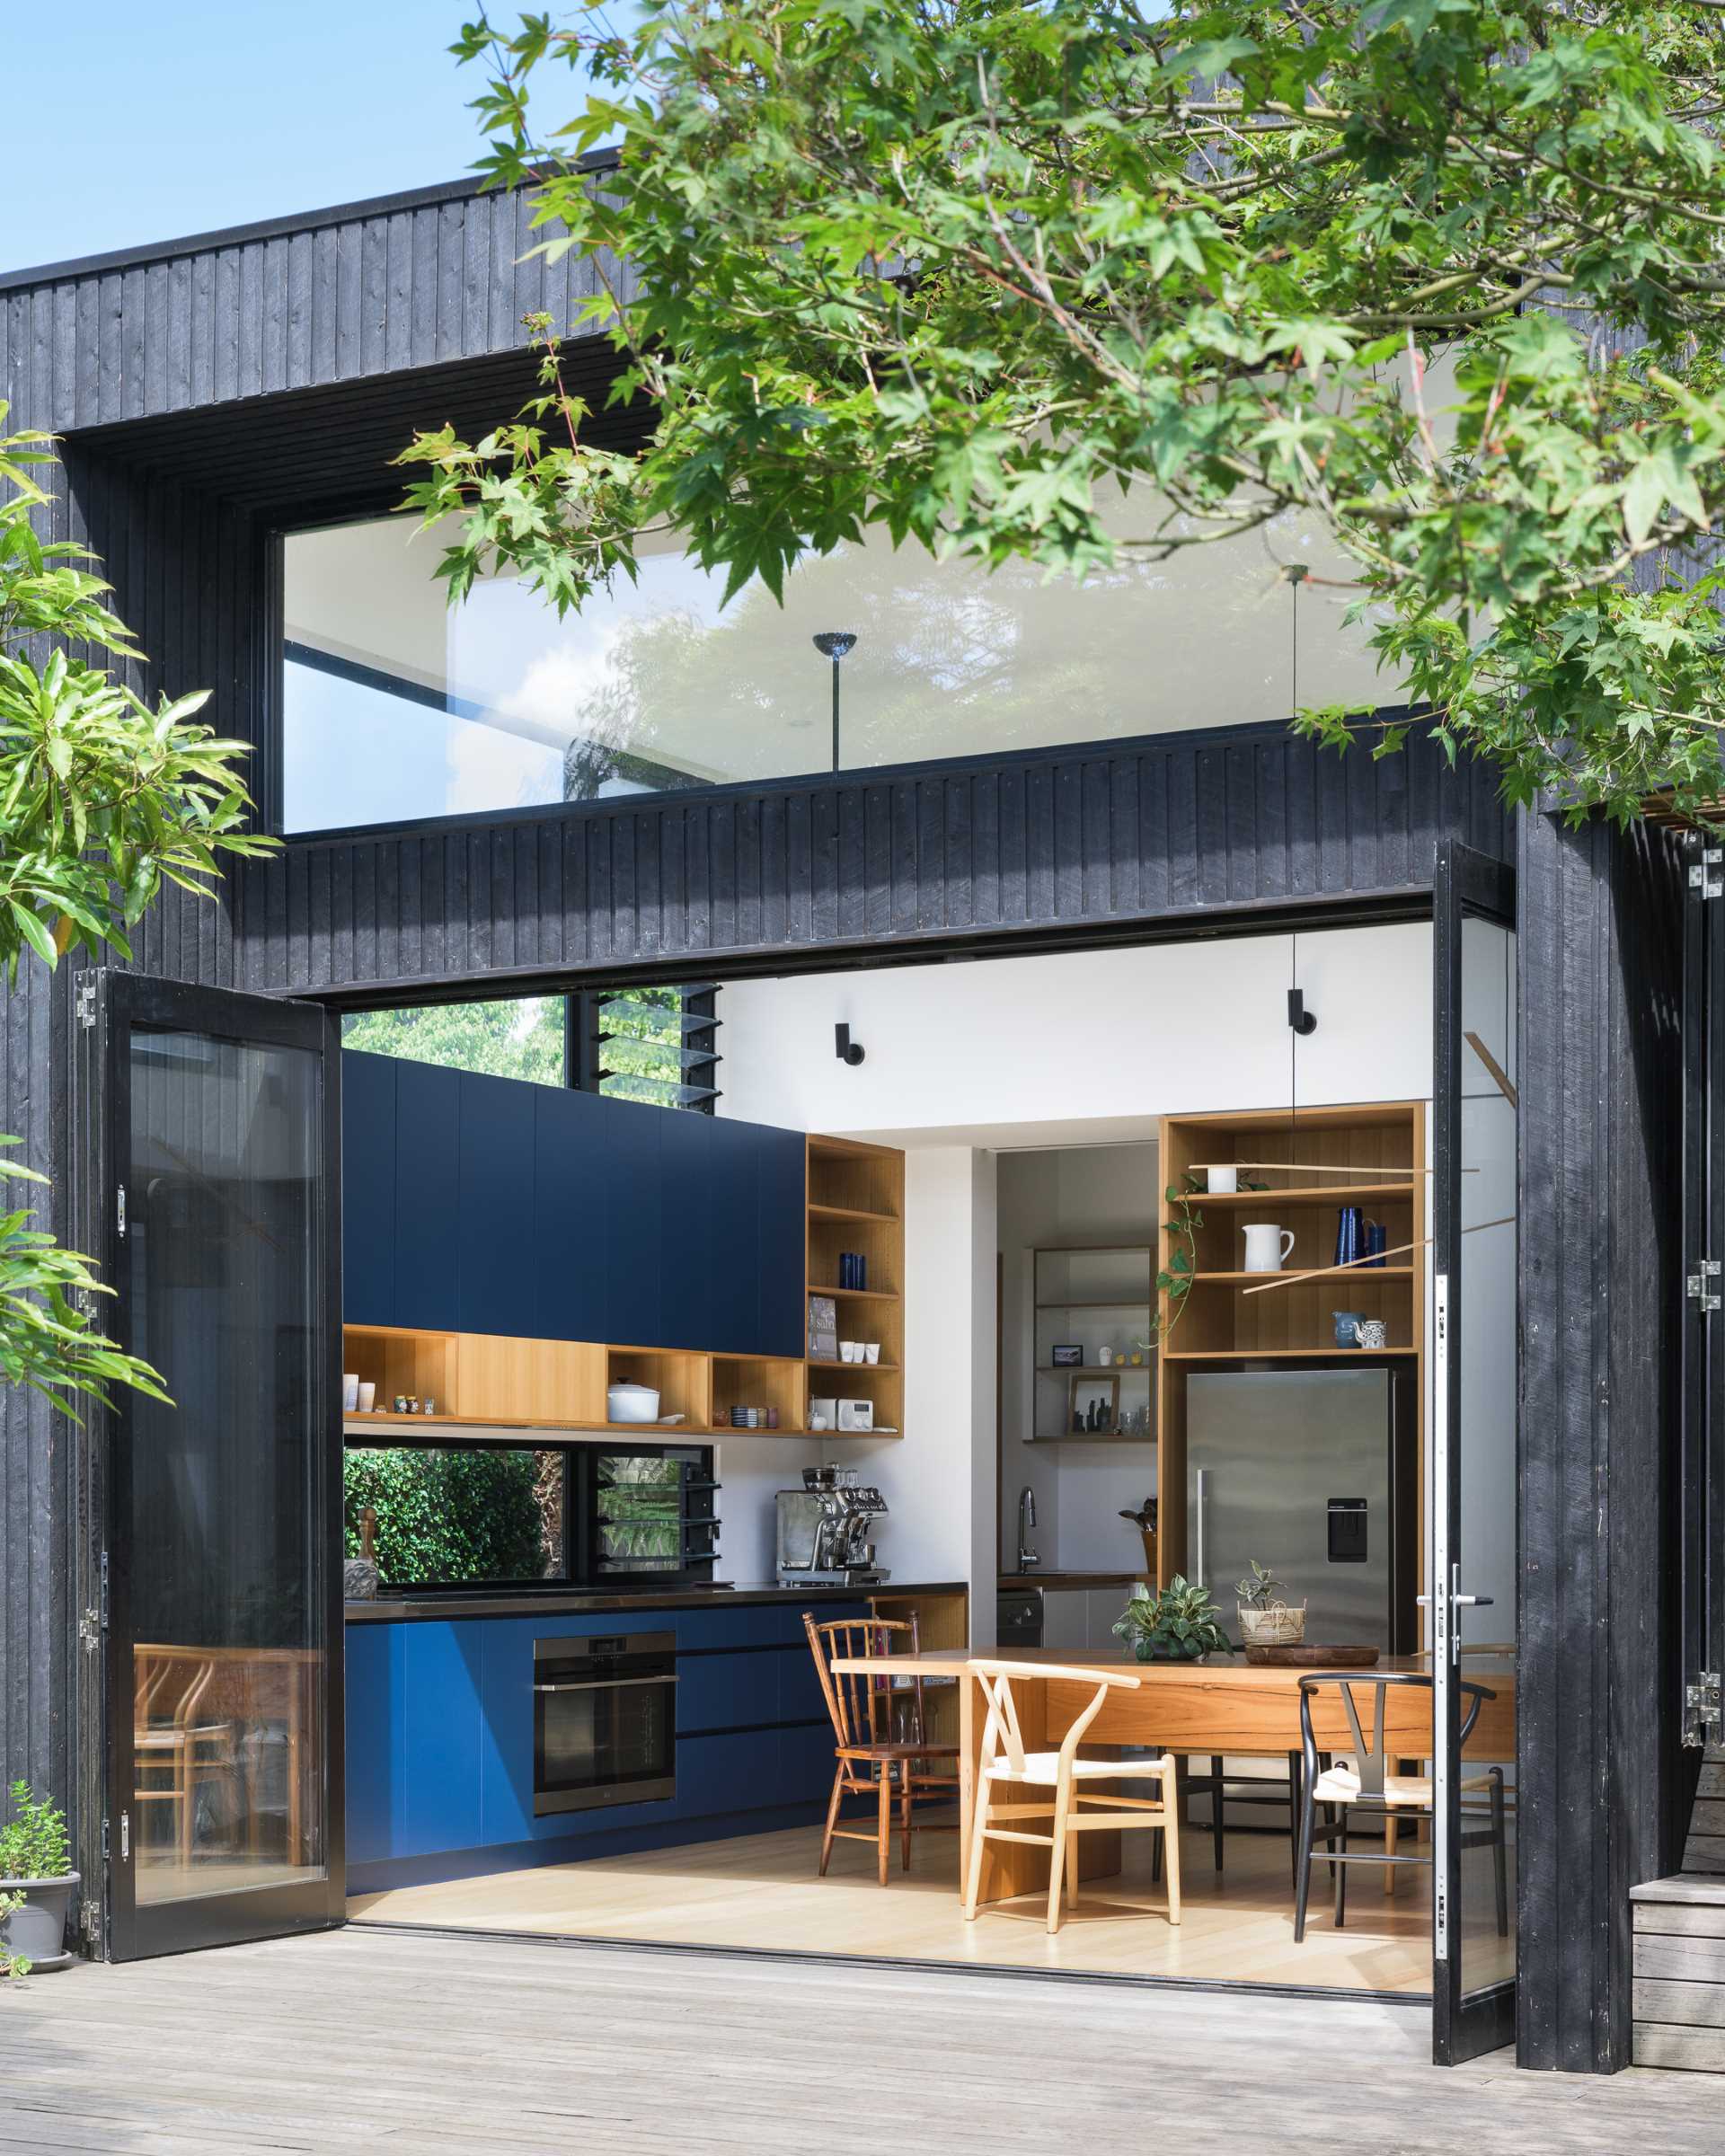 This modern rear extension has has bi-fold doors that open to connect the kitchen and dining area to the yard.